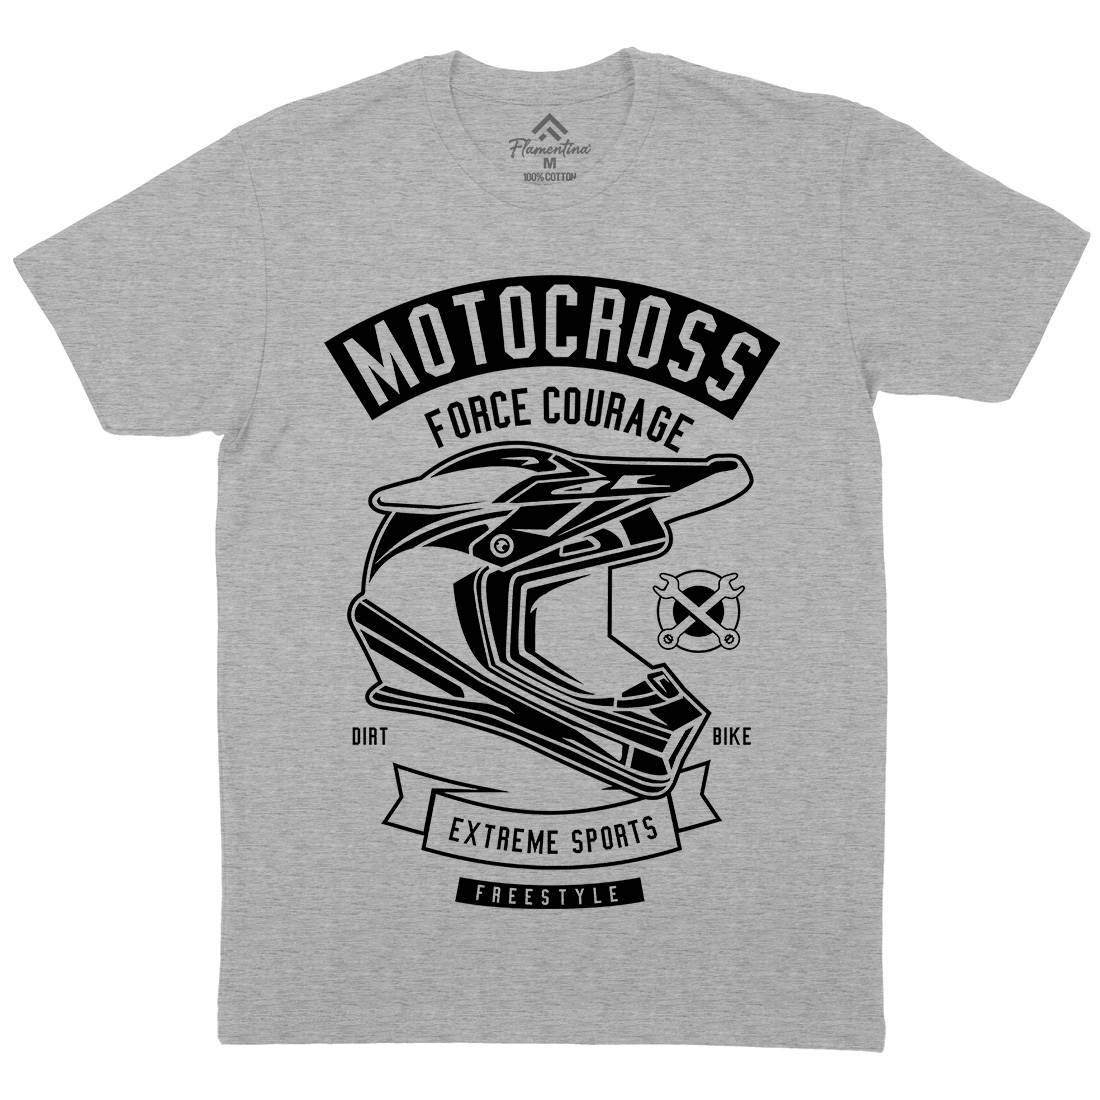 Motocross Force Courage Mens Organic Crew Neck T-Shirt Motorcycles B576